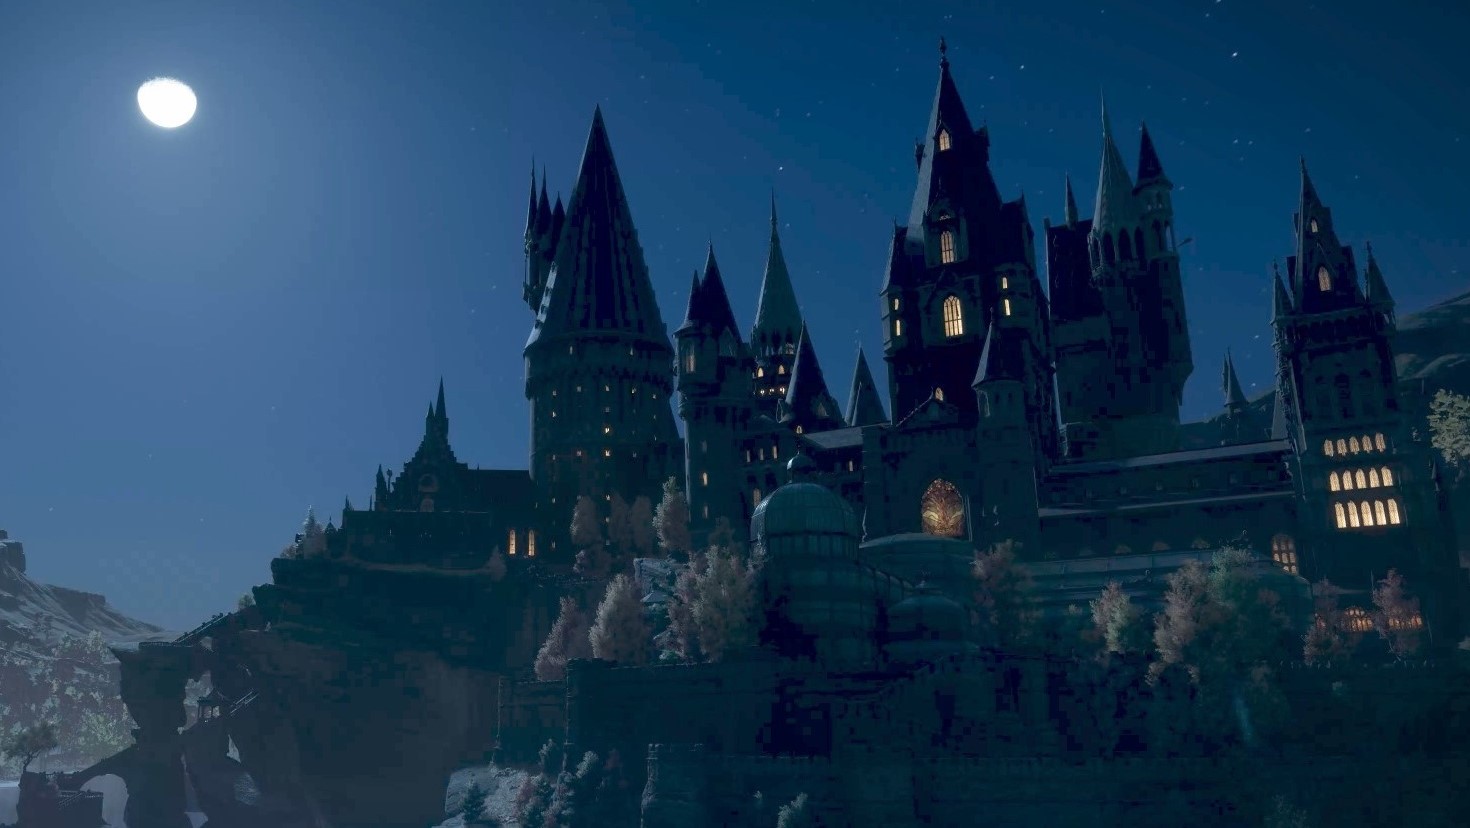 Harry Potter: Warner Bros. Teases Exciting Future of Franchise